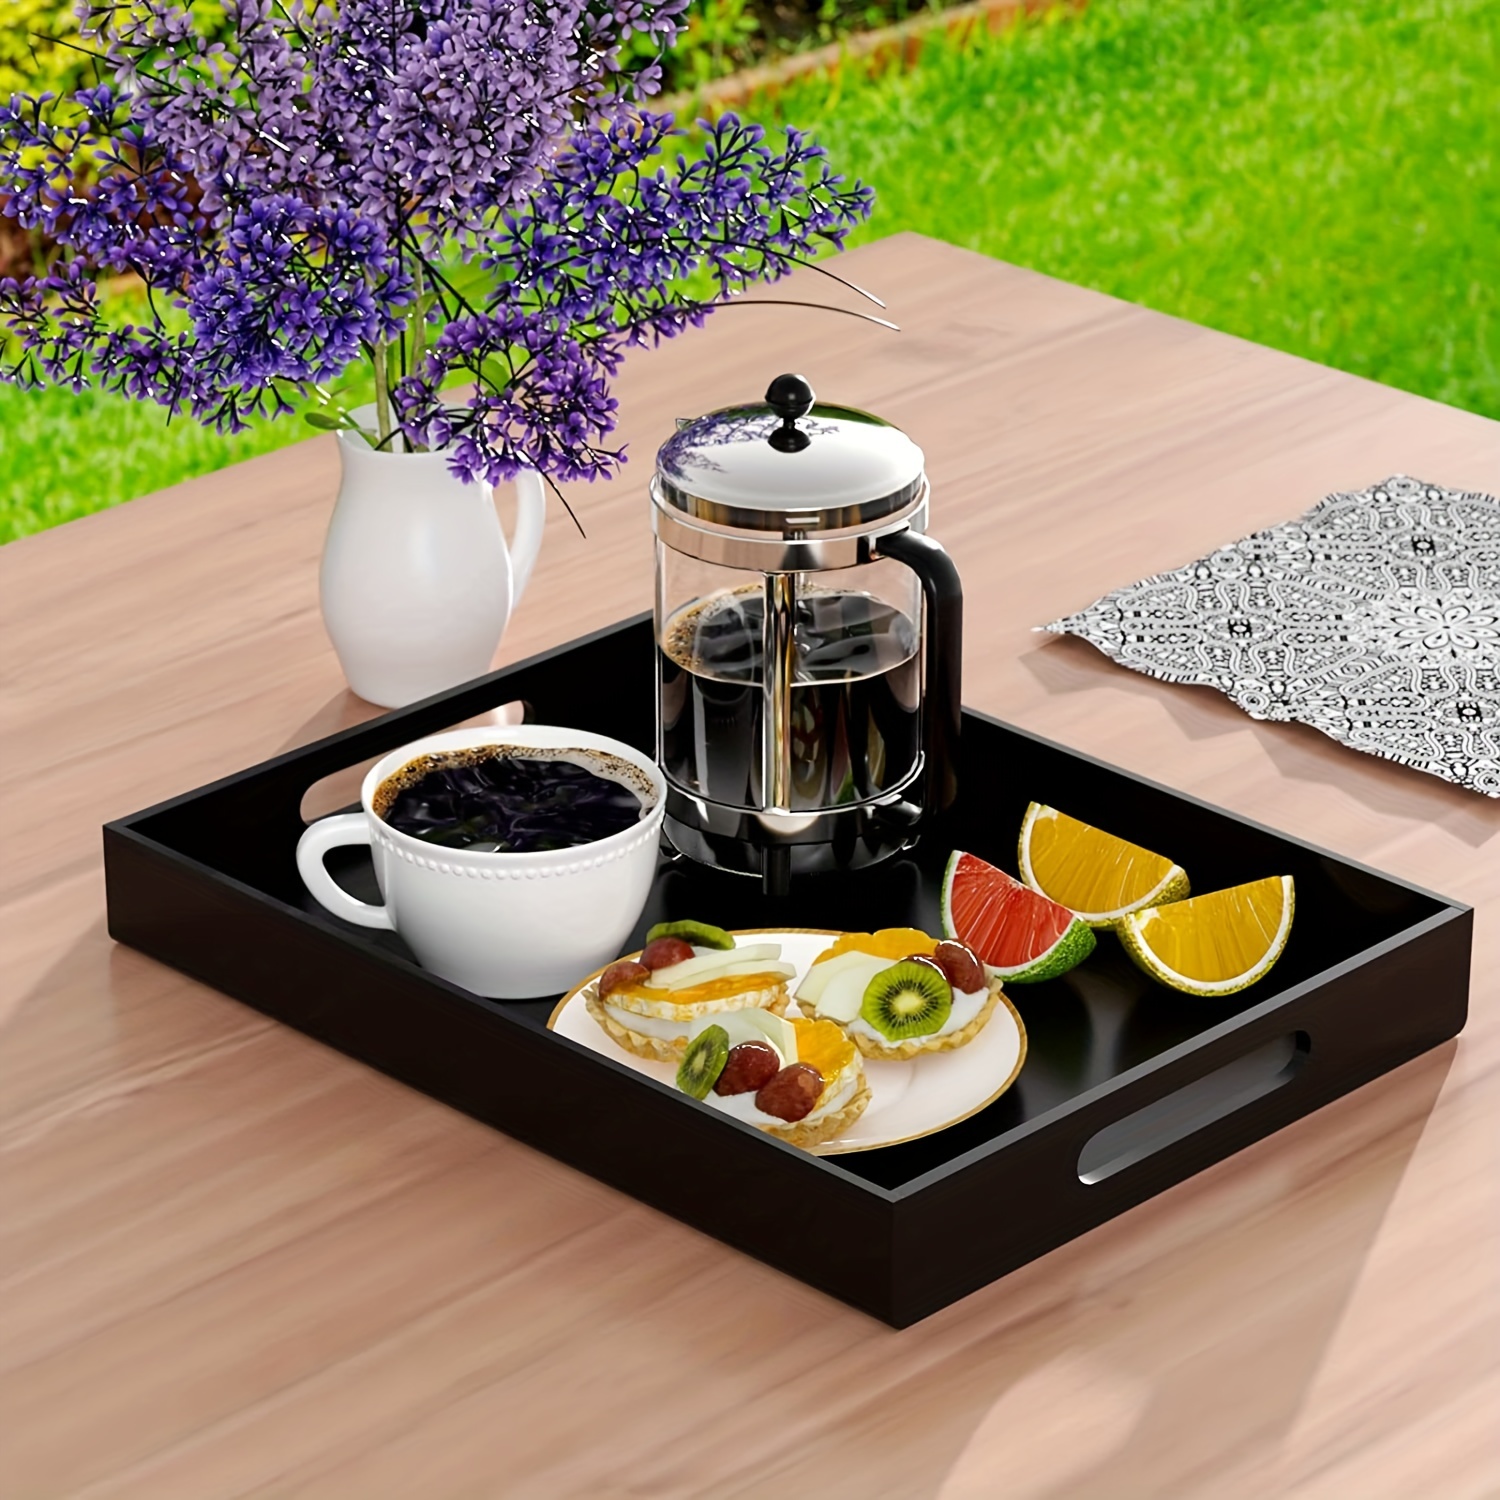 

1pc, Black Wood Tray - Perfect For Dinner, Tea, Snacks, And More - Rectangular Shape - Durable And Stylish - Ideal For Home, Restaurant, And Party Decor